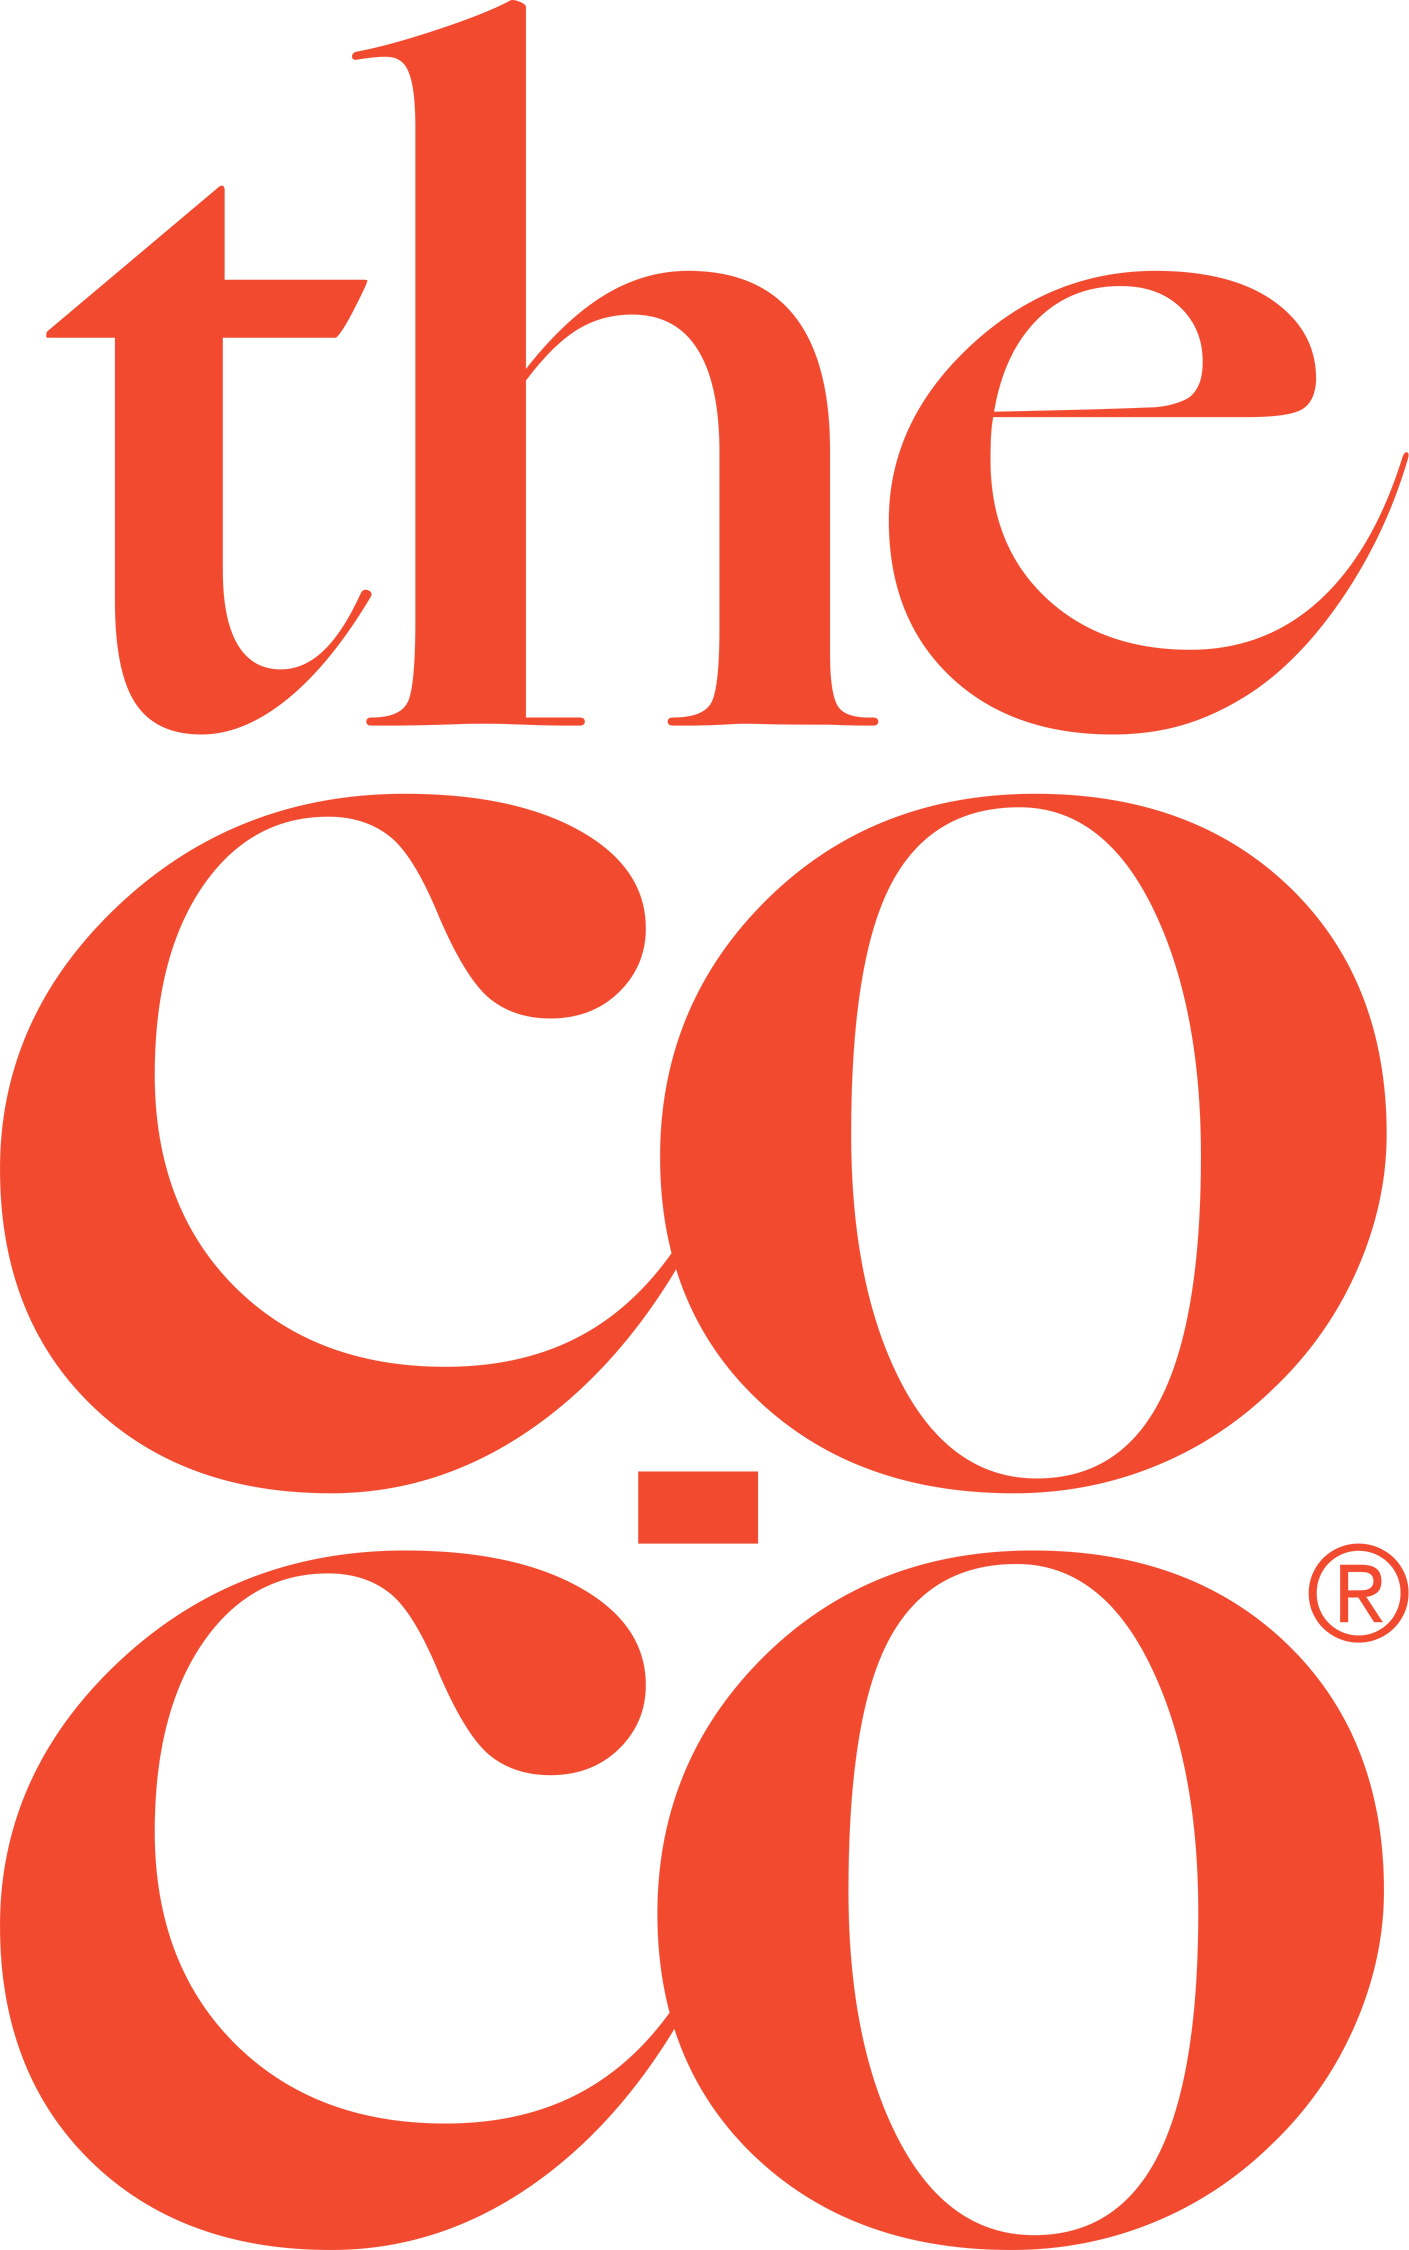 The Co-Co | Complimentary Coworking - Sesh Coworking